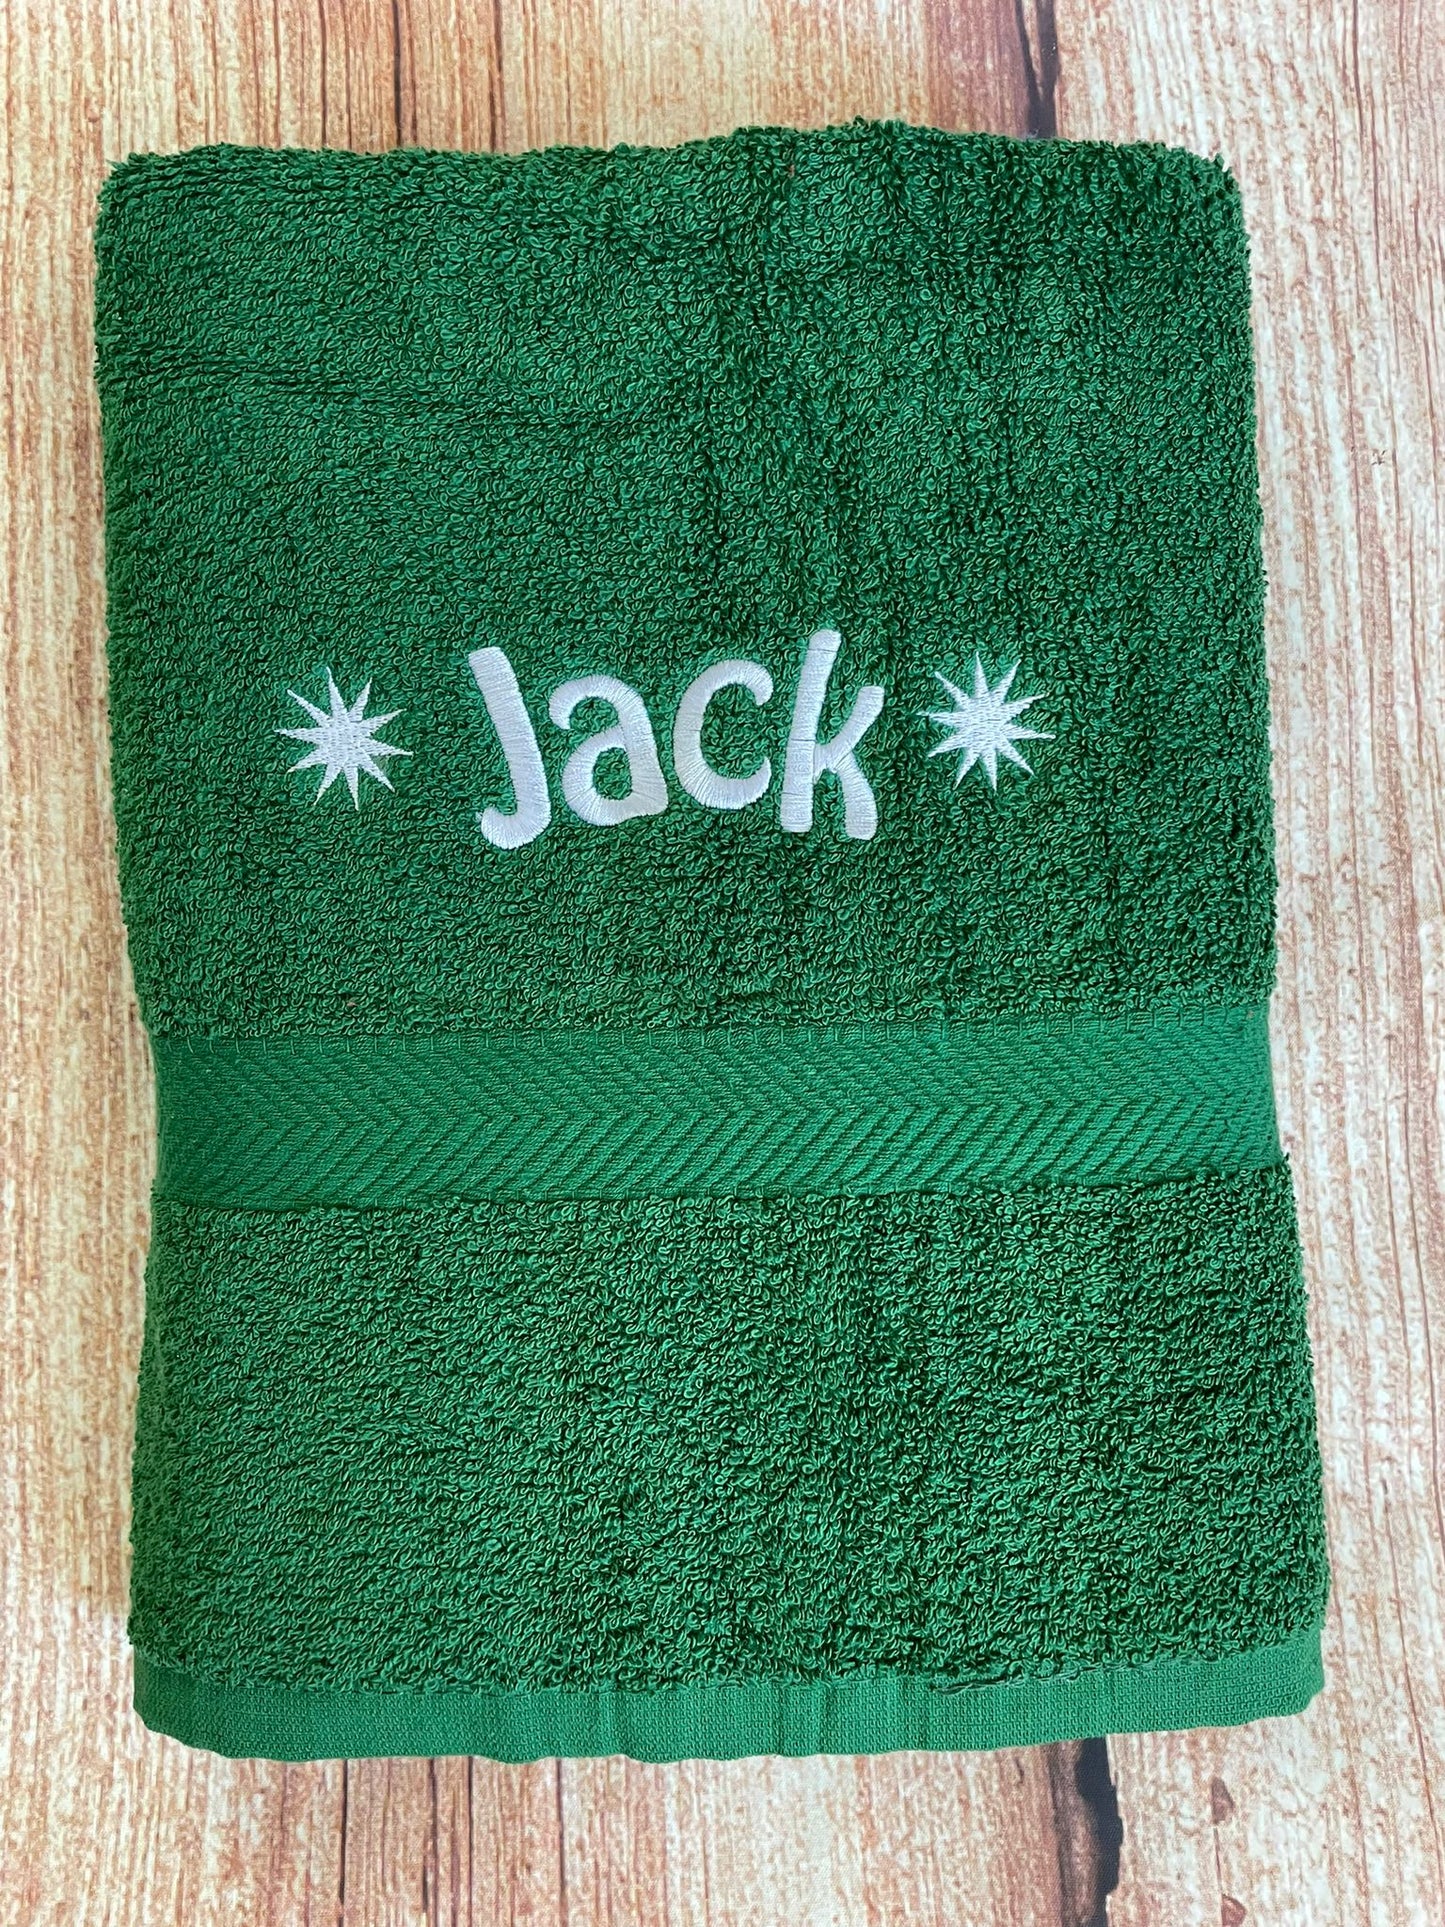 Embroidered Personalised Swimming or Sports Towel.  Ideal kids gift // Stars